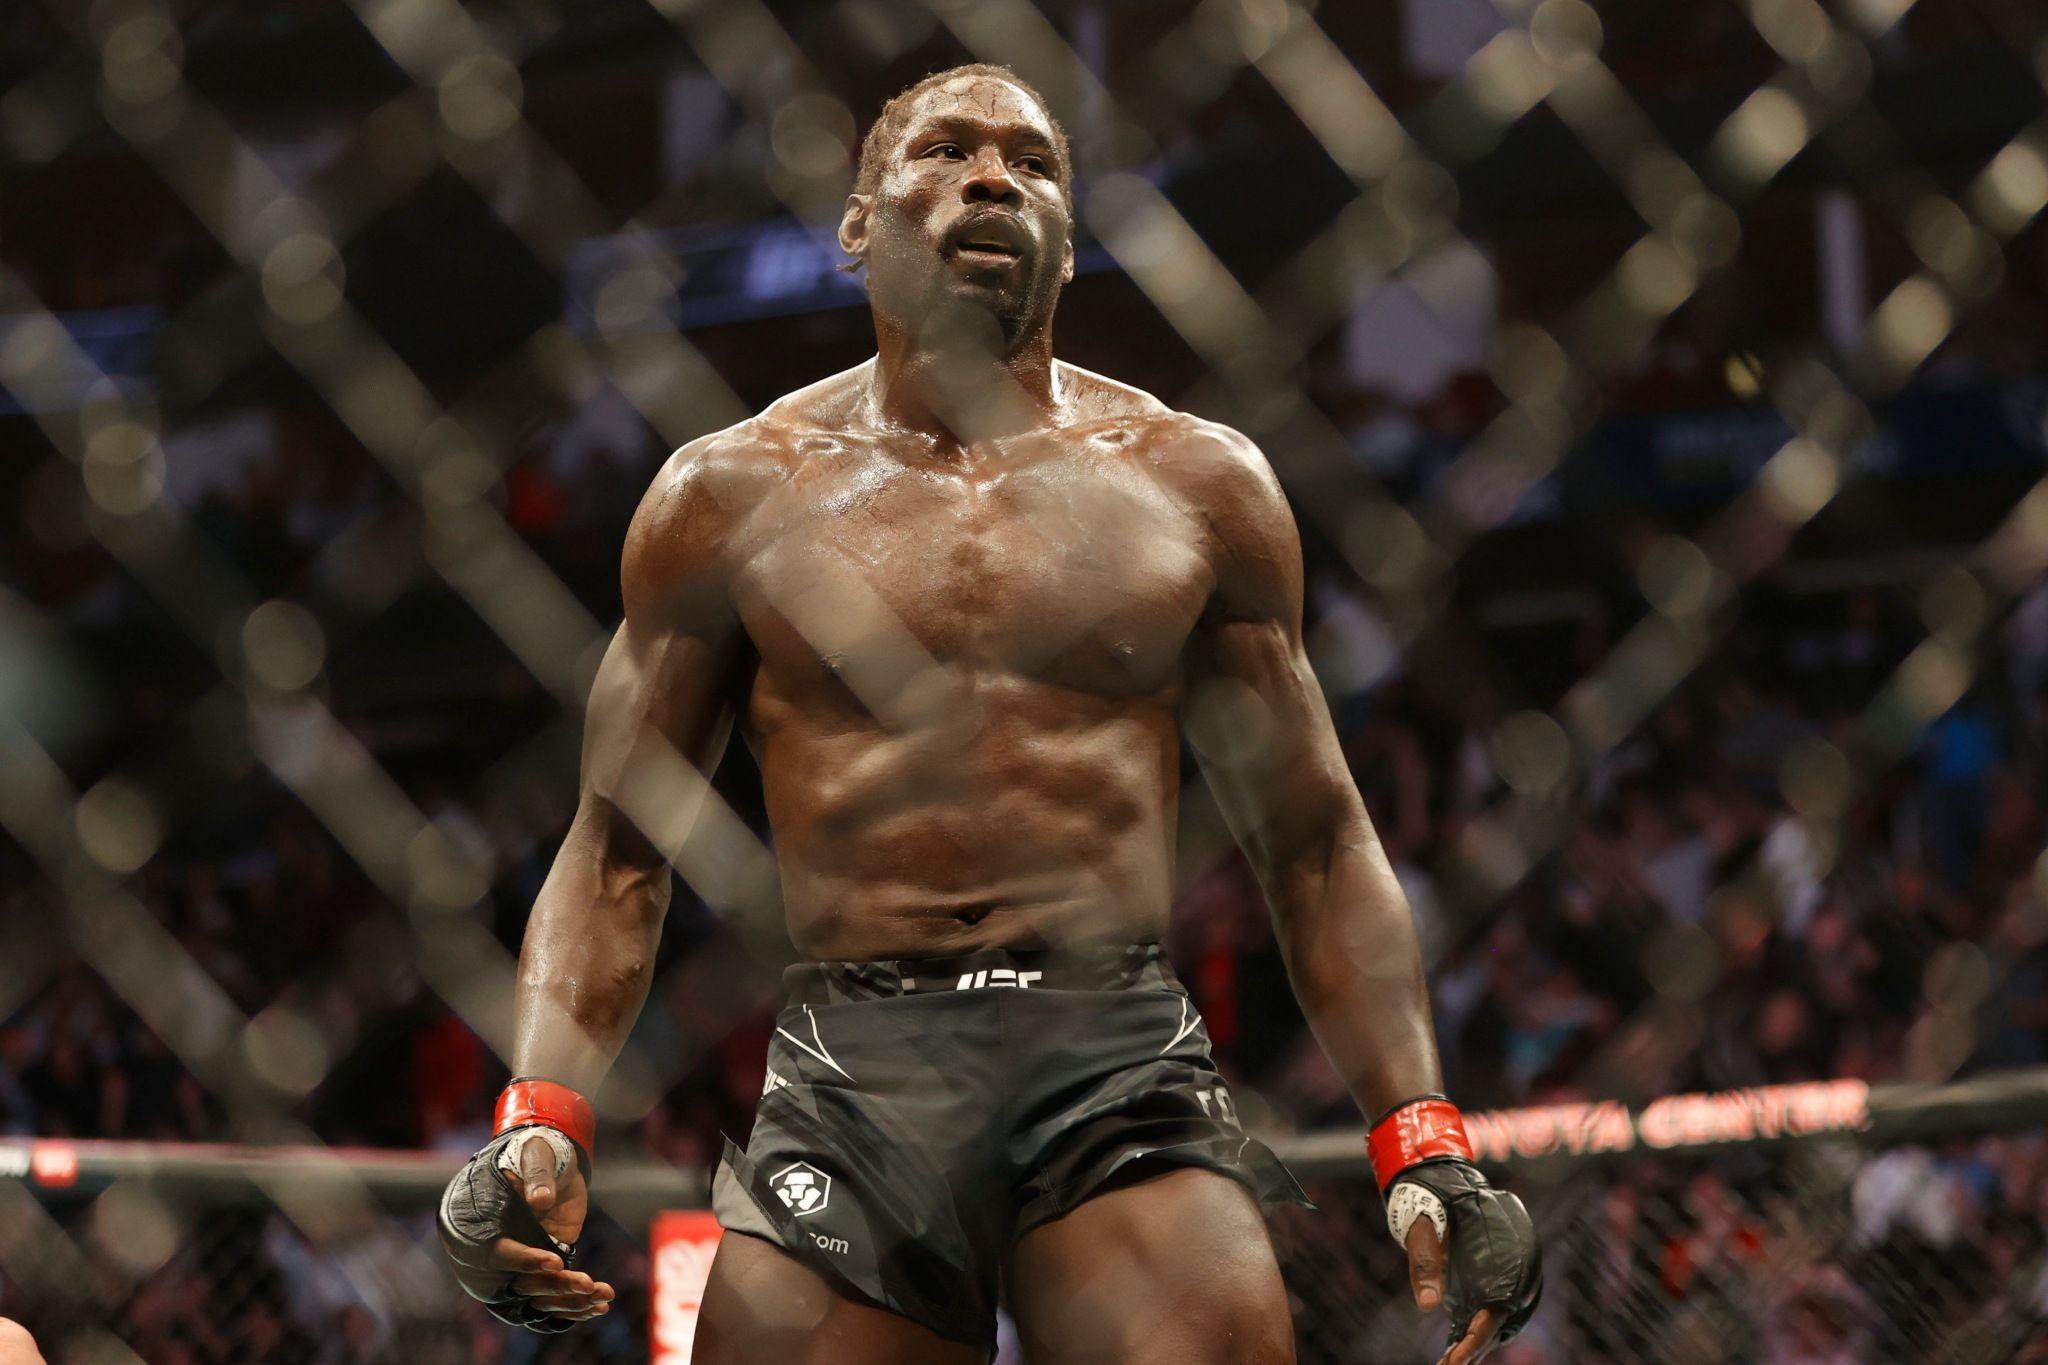 Jared Cannonier looks to be the one to dethrone Adesanya. Photo credit: Troy Taormina - USA Today Sports